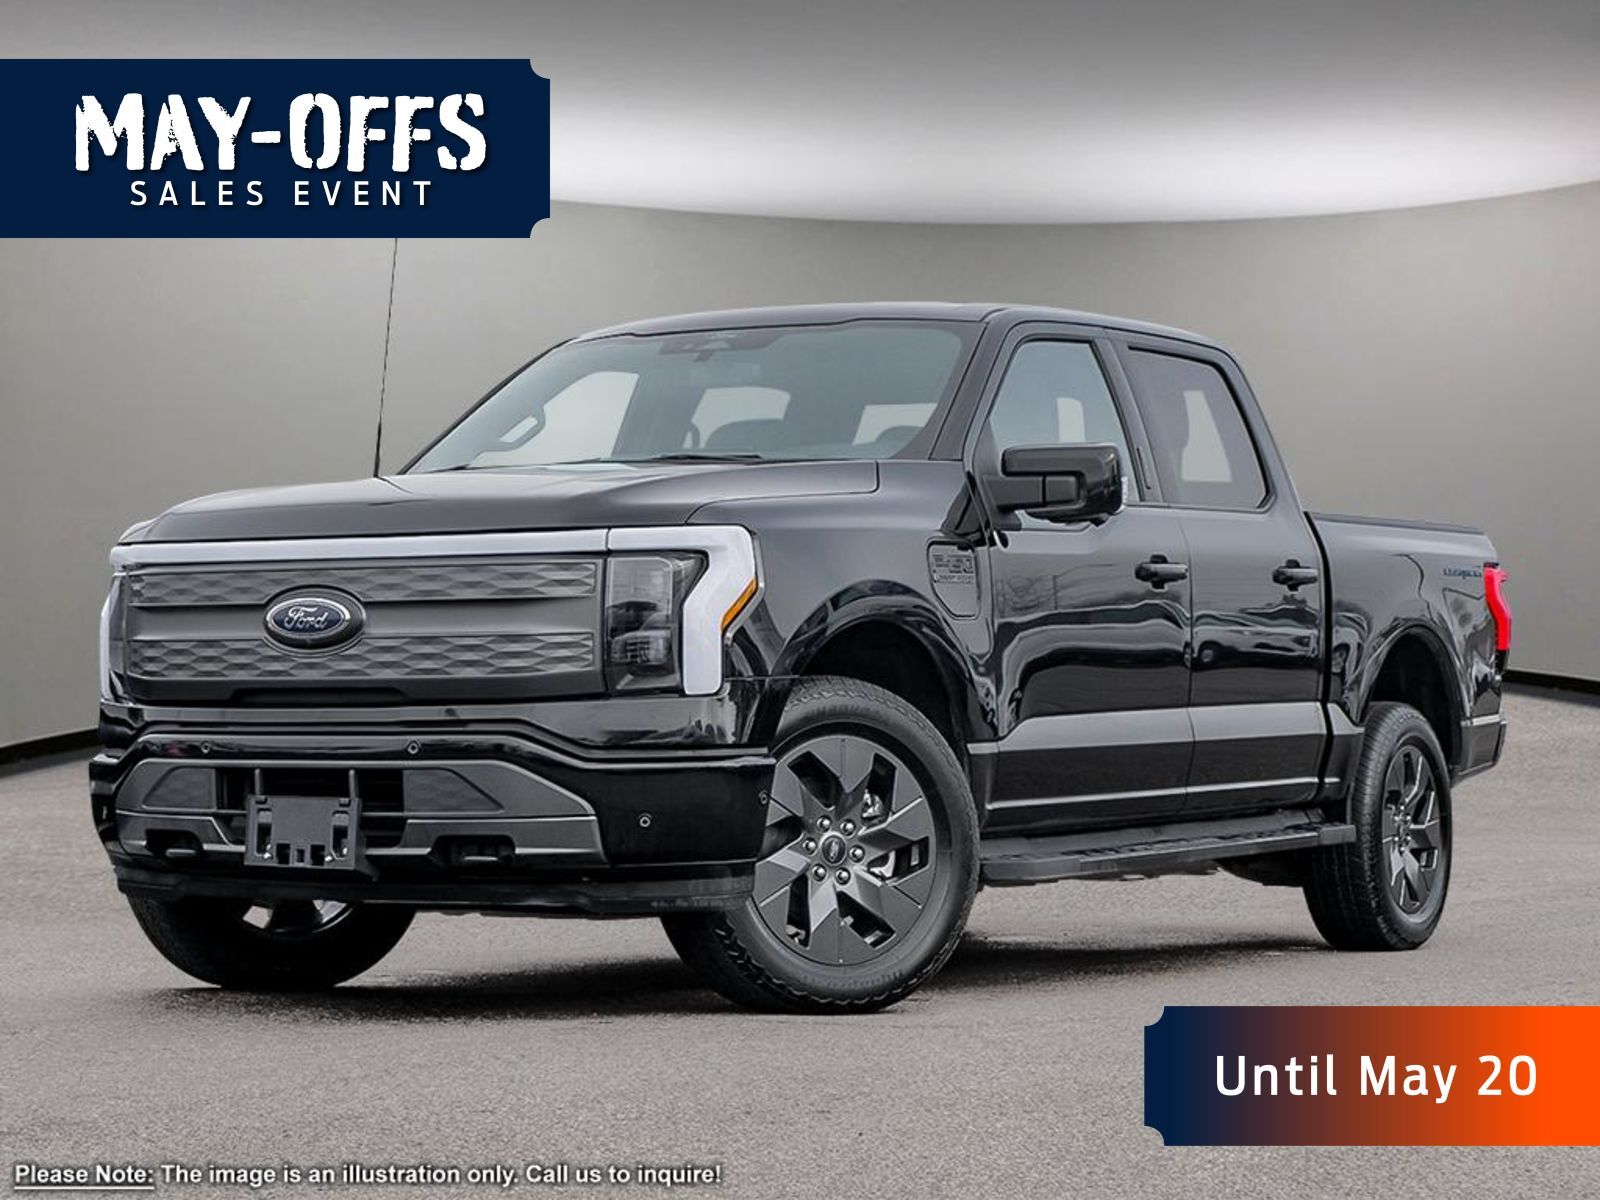 2023 Ford F-150 Lightning 511A LARIAT, CO-PILOT360 ACTIVE 2.0, TOW TECHNOLOG